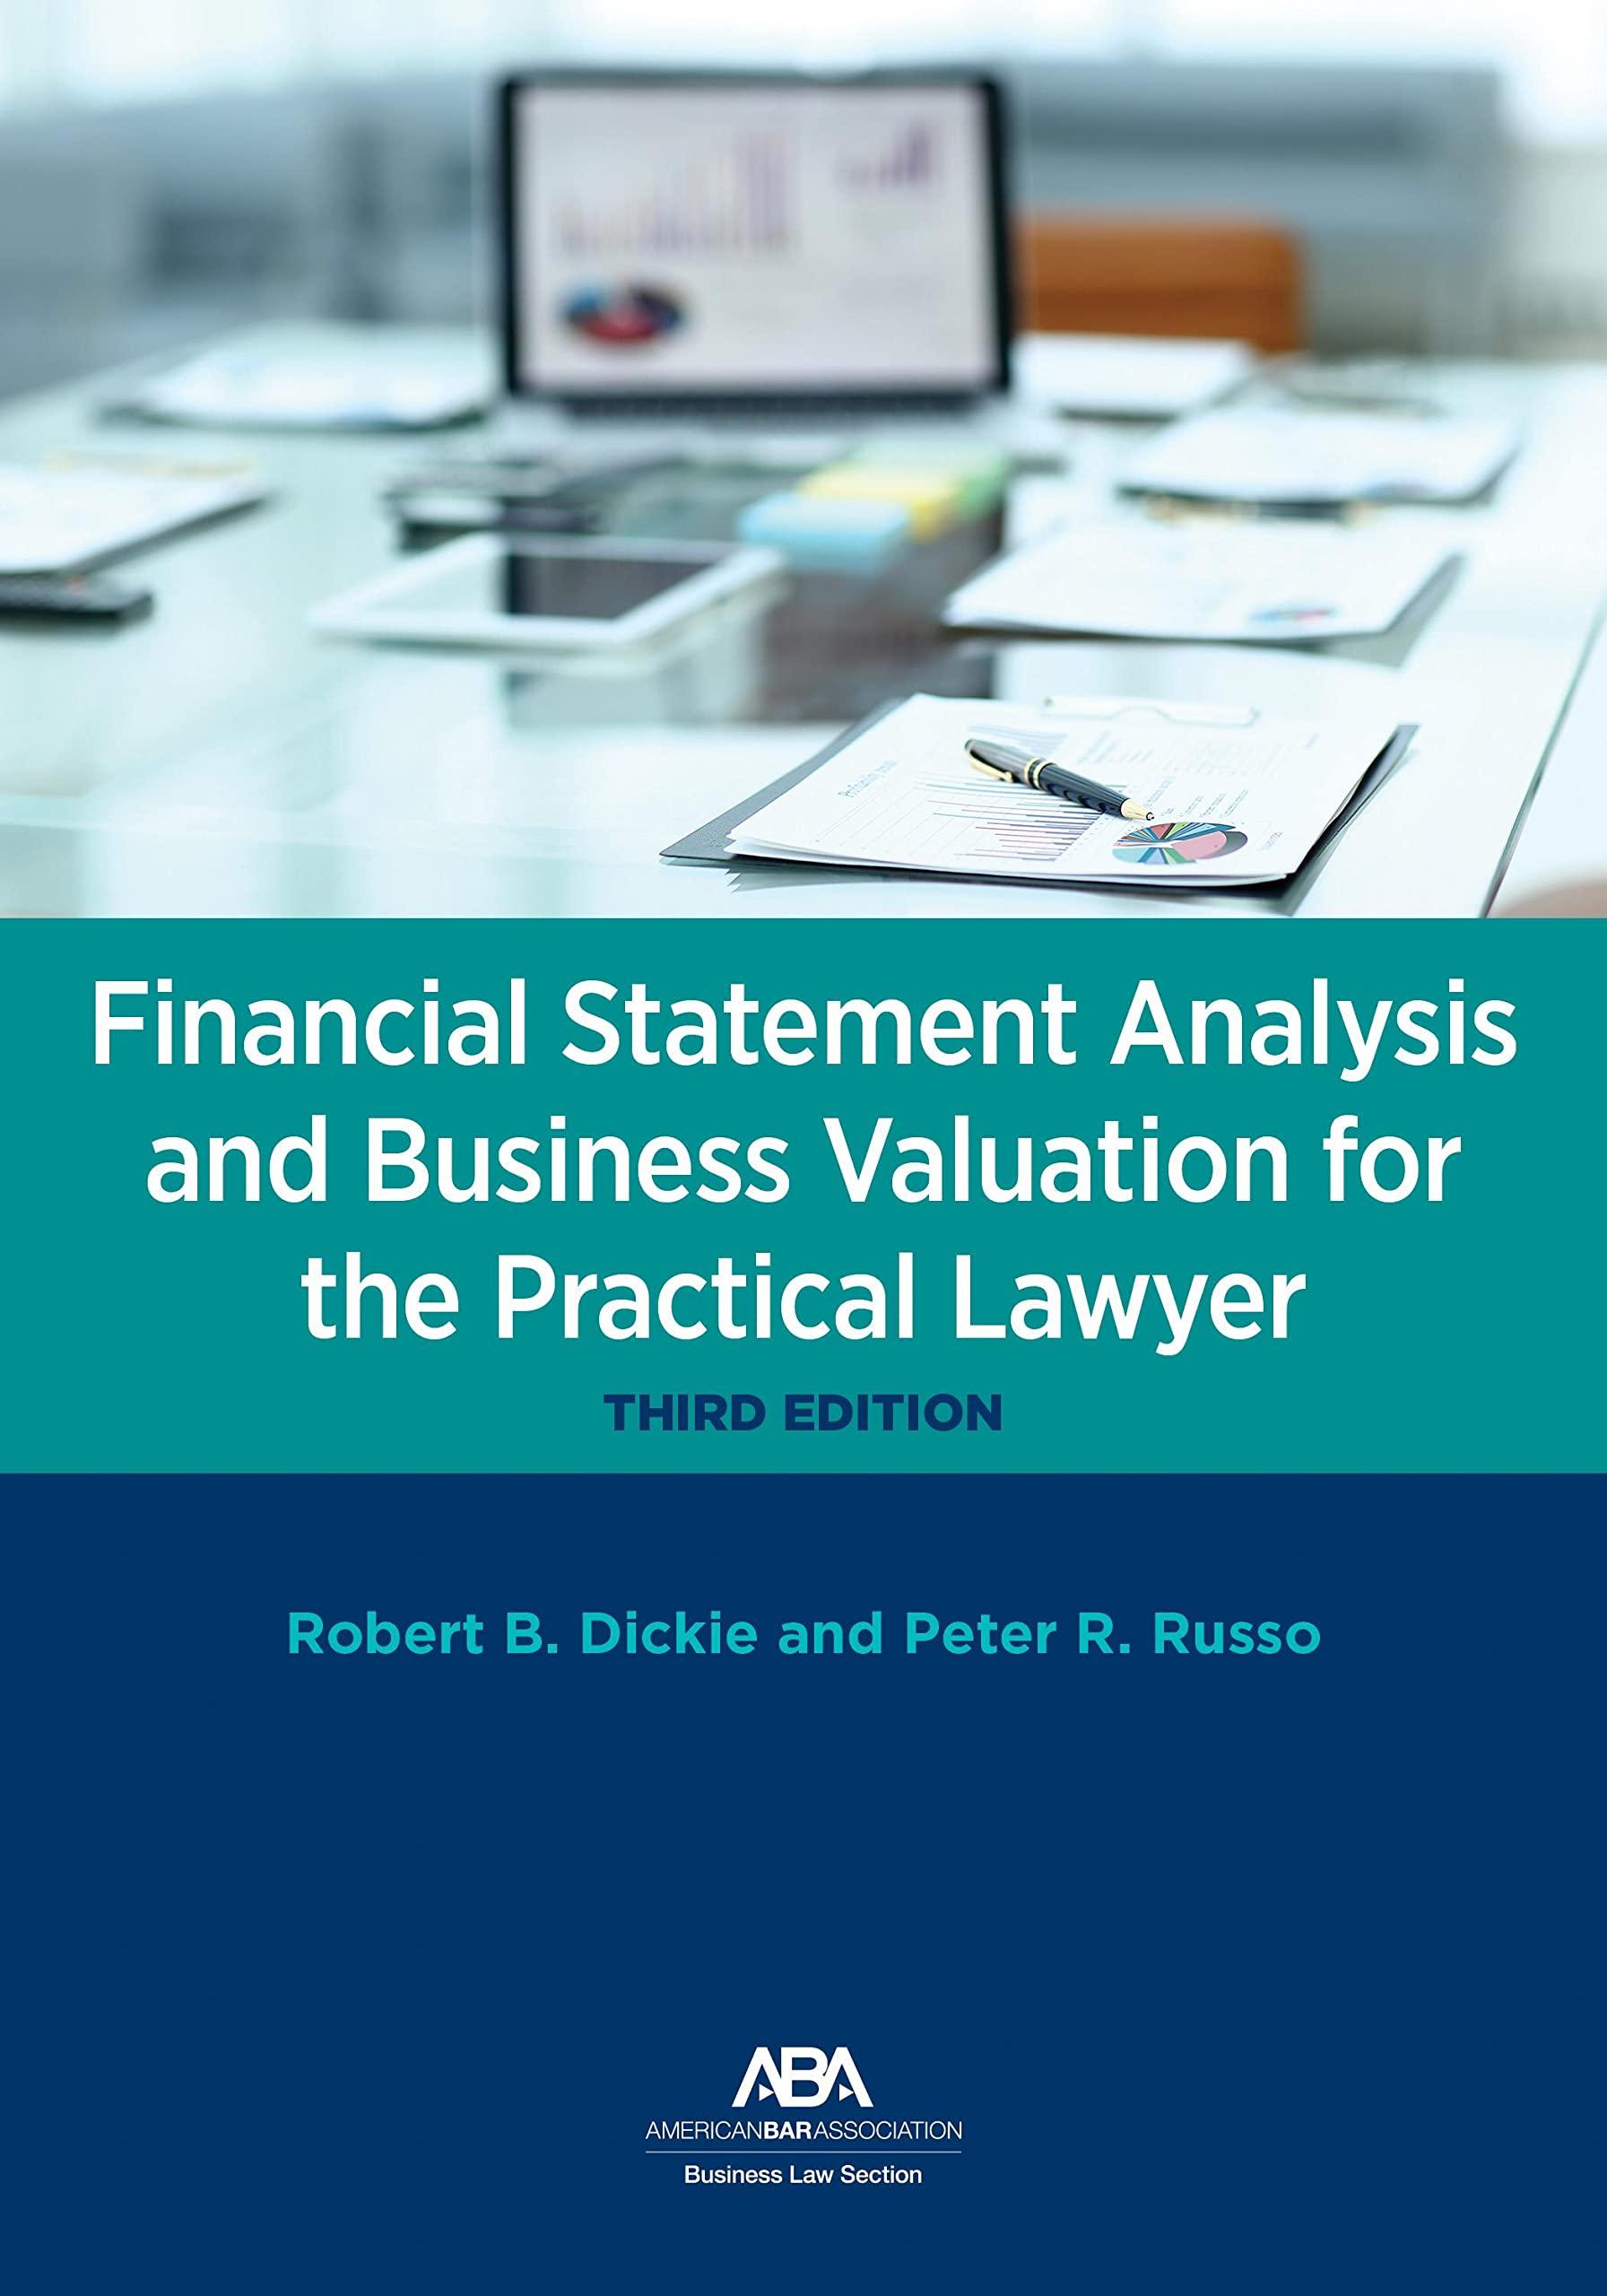 financial statement analysis and business valuation for the practical lawyer 3rd edition robert b. dickie,